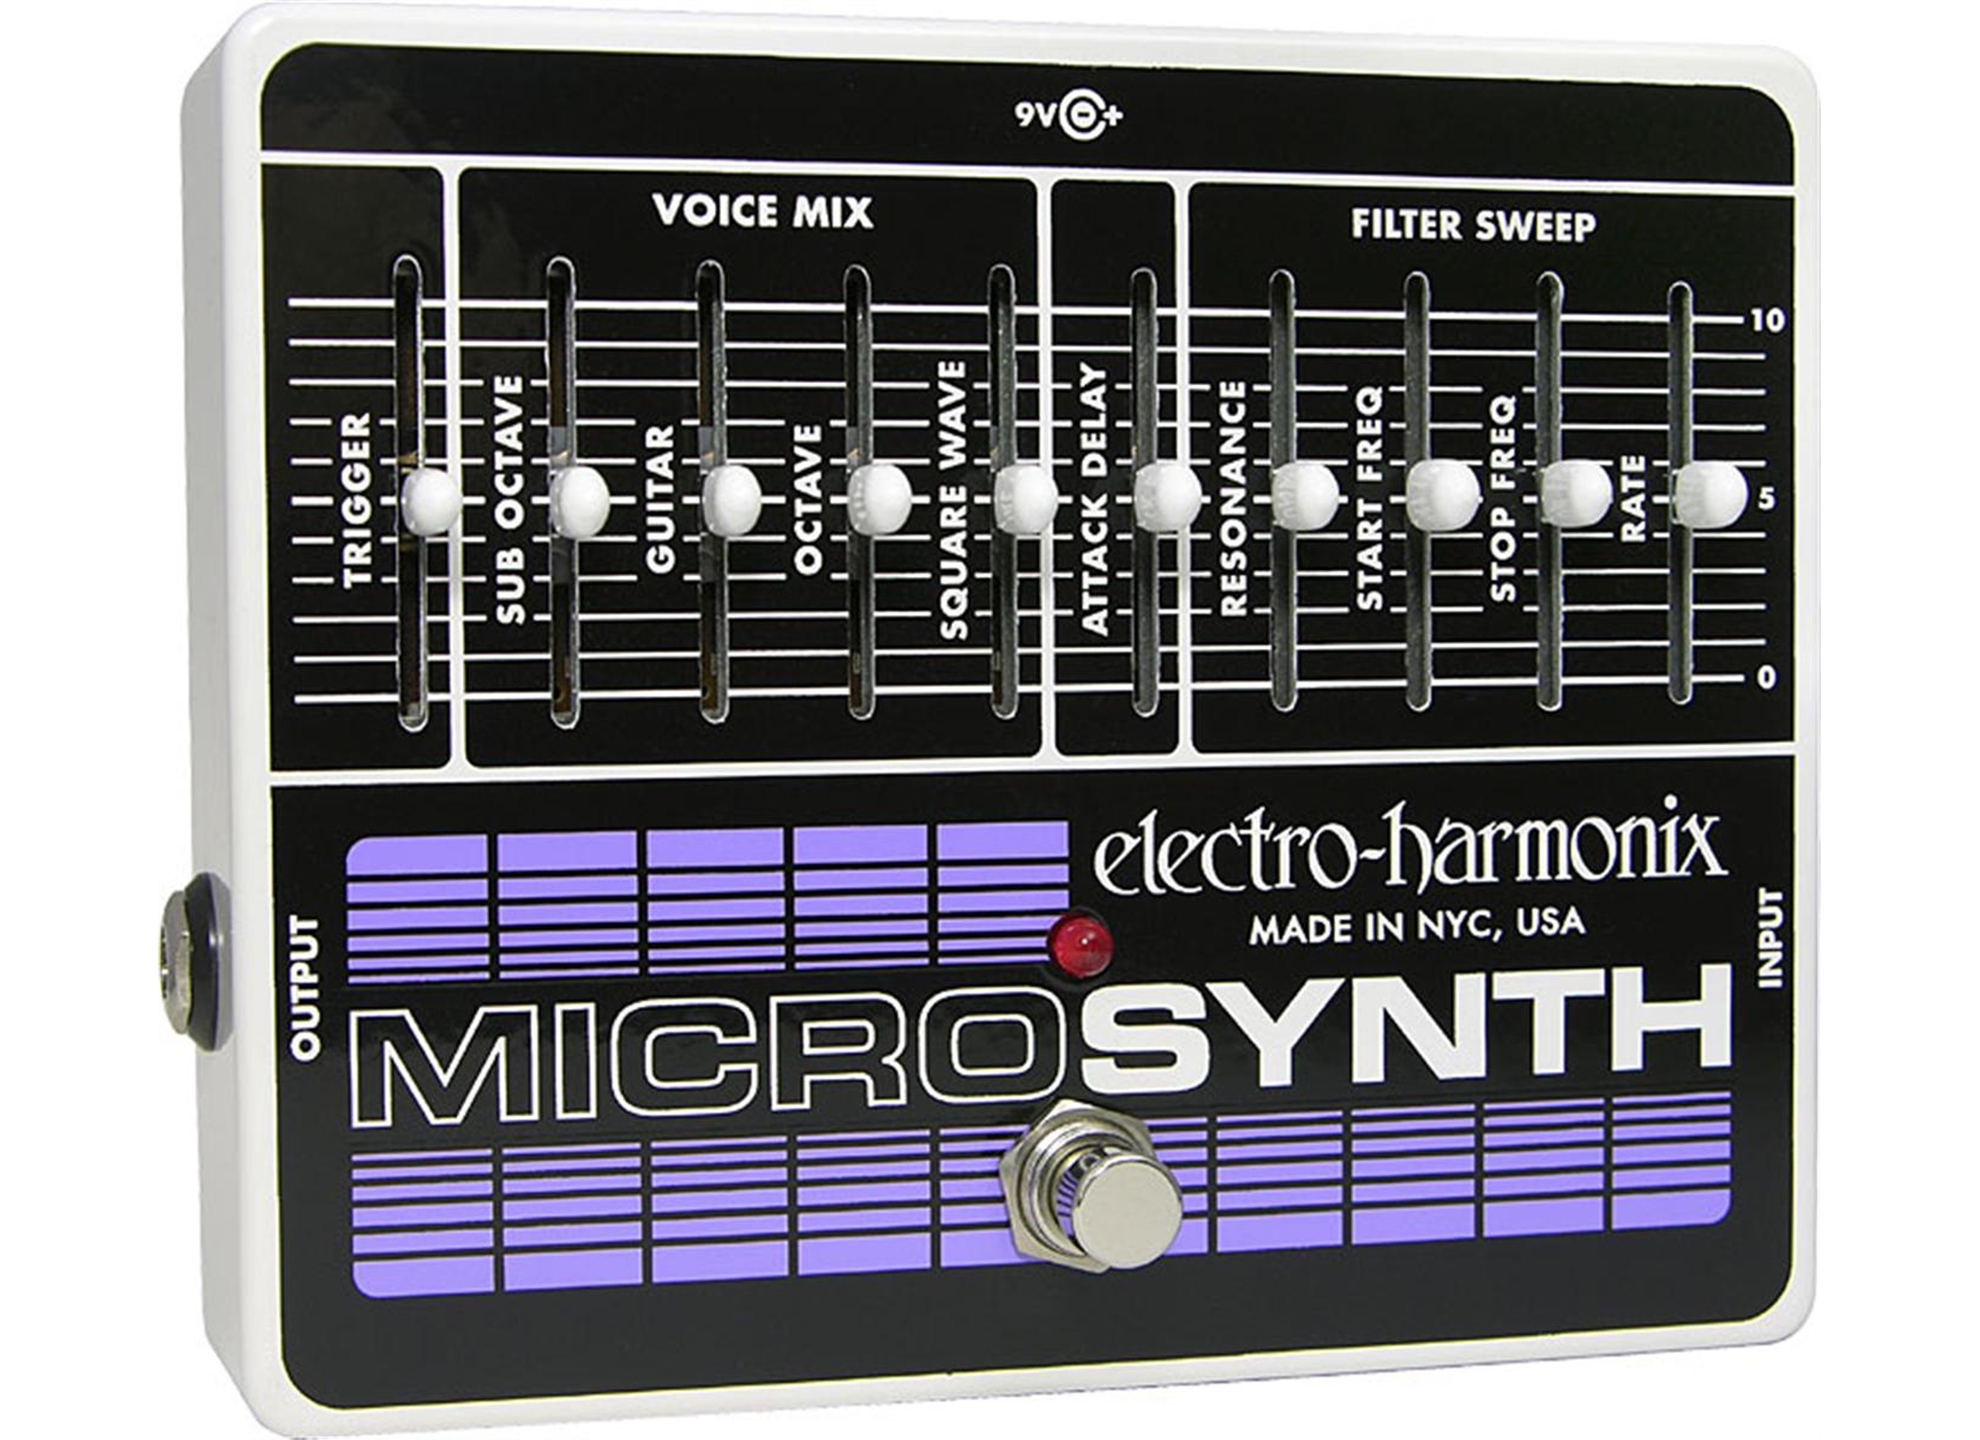 Microsynth